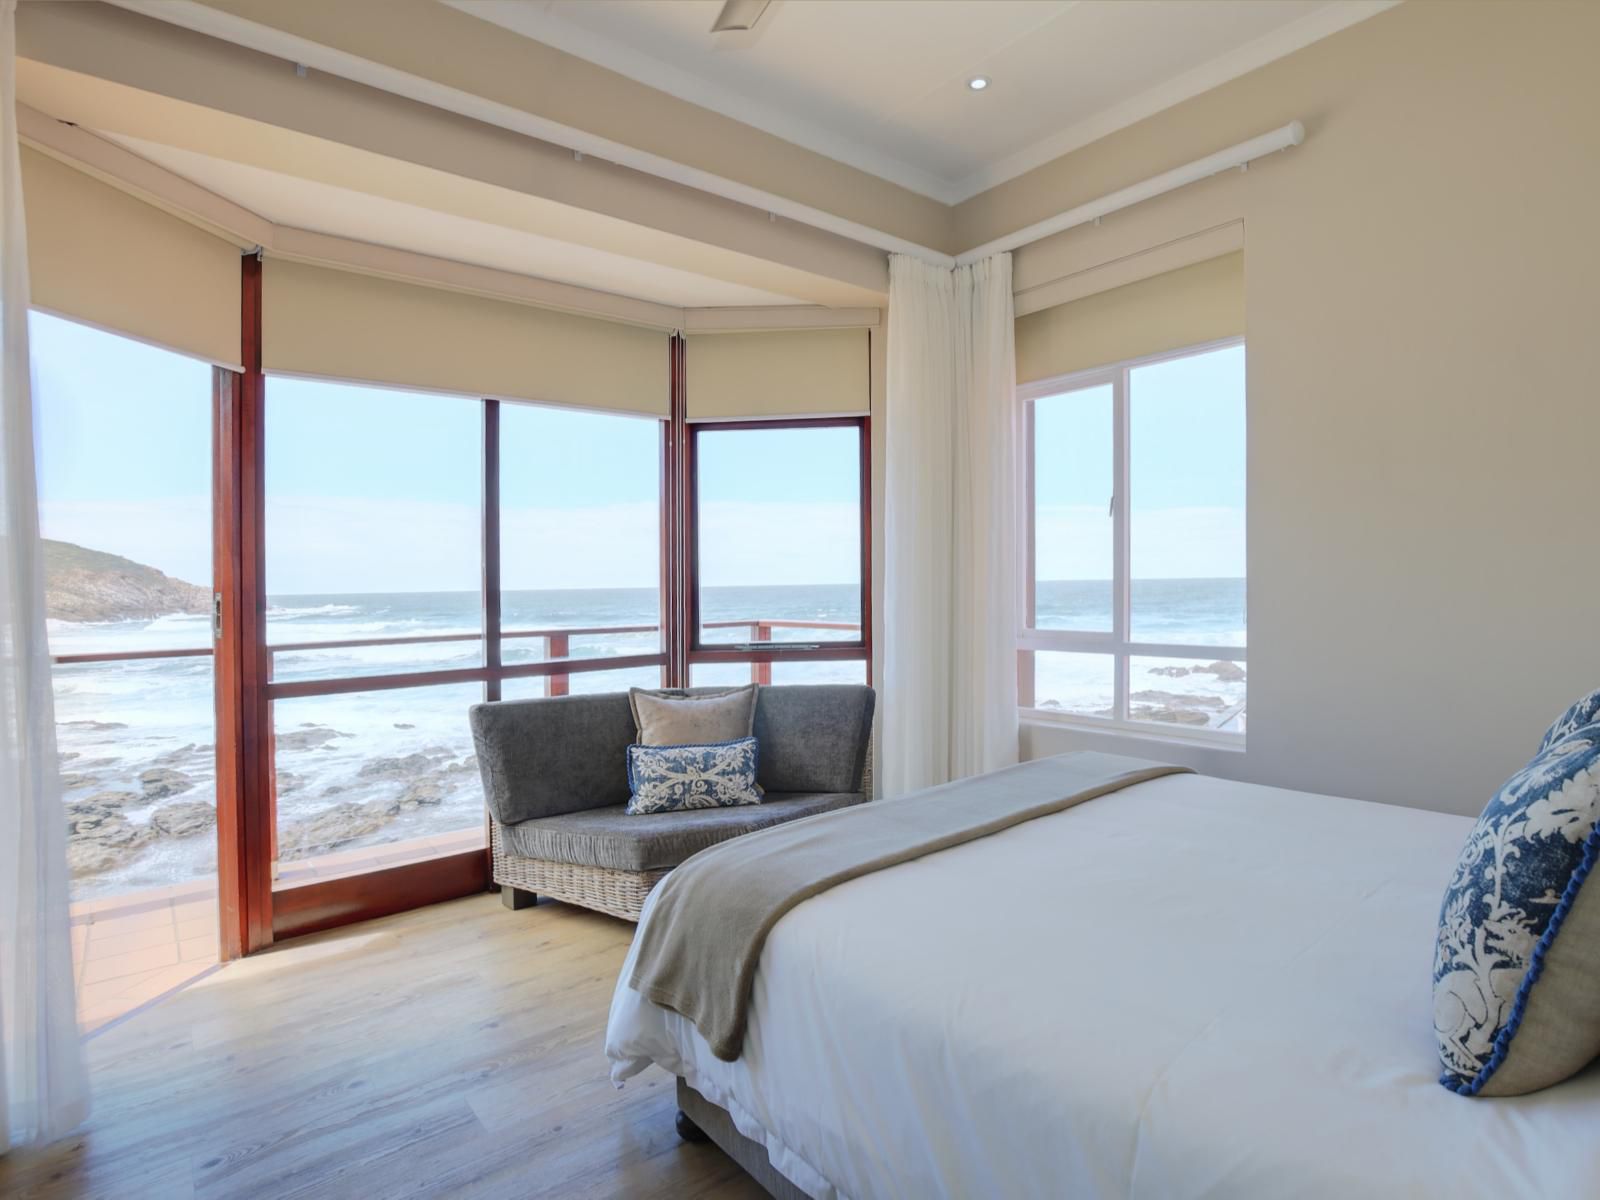 Oppiesee Selfcatering Apartments Herolds Bay Western Cape South Africa Beach, Nature, Sand